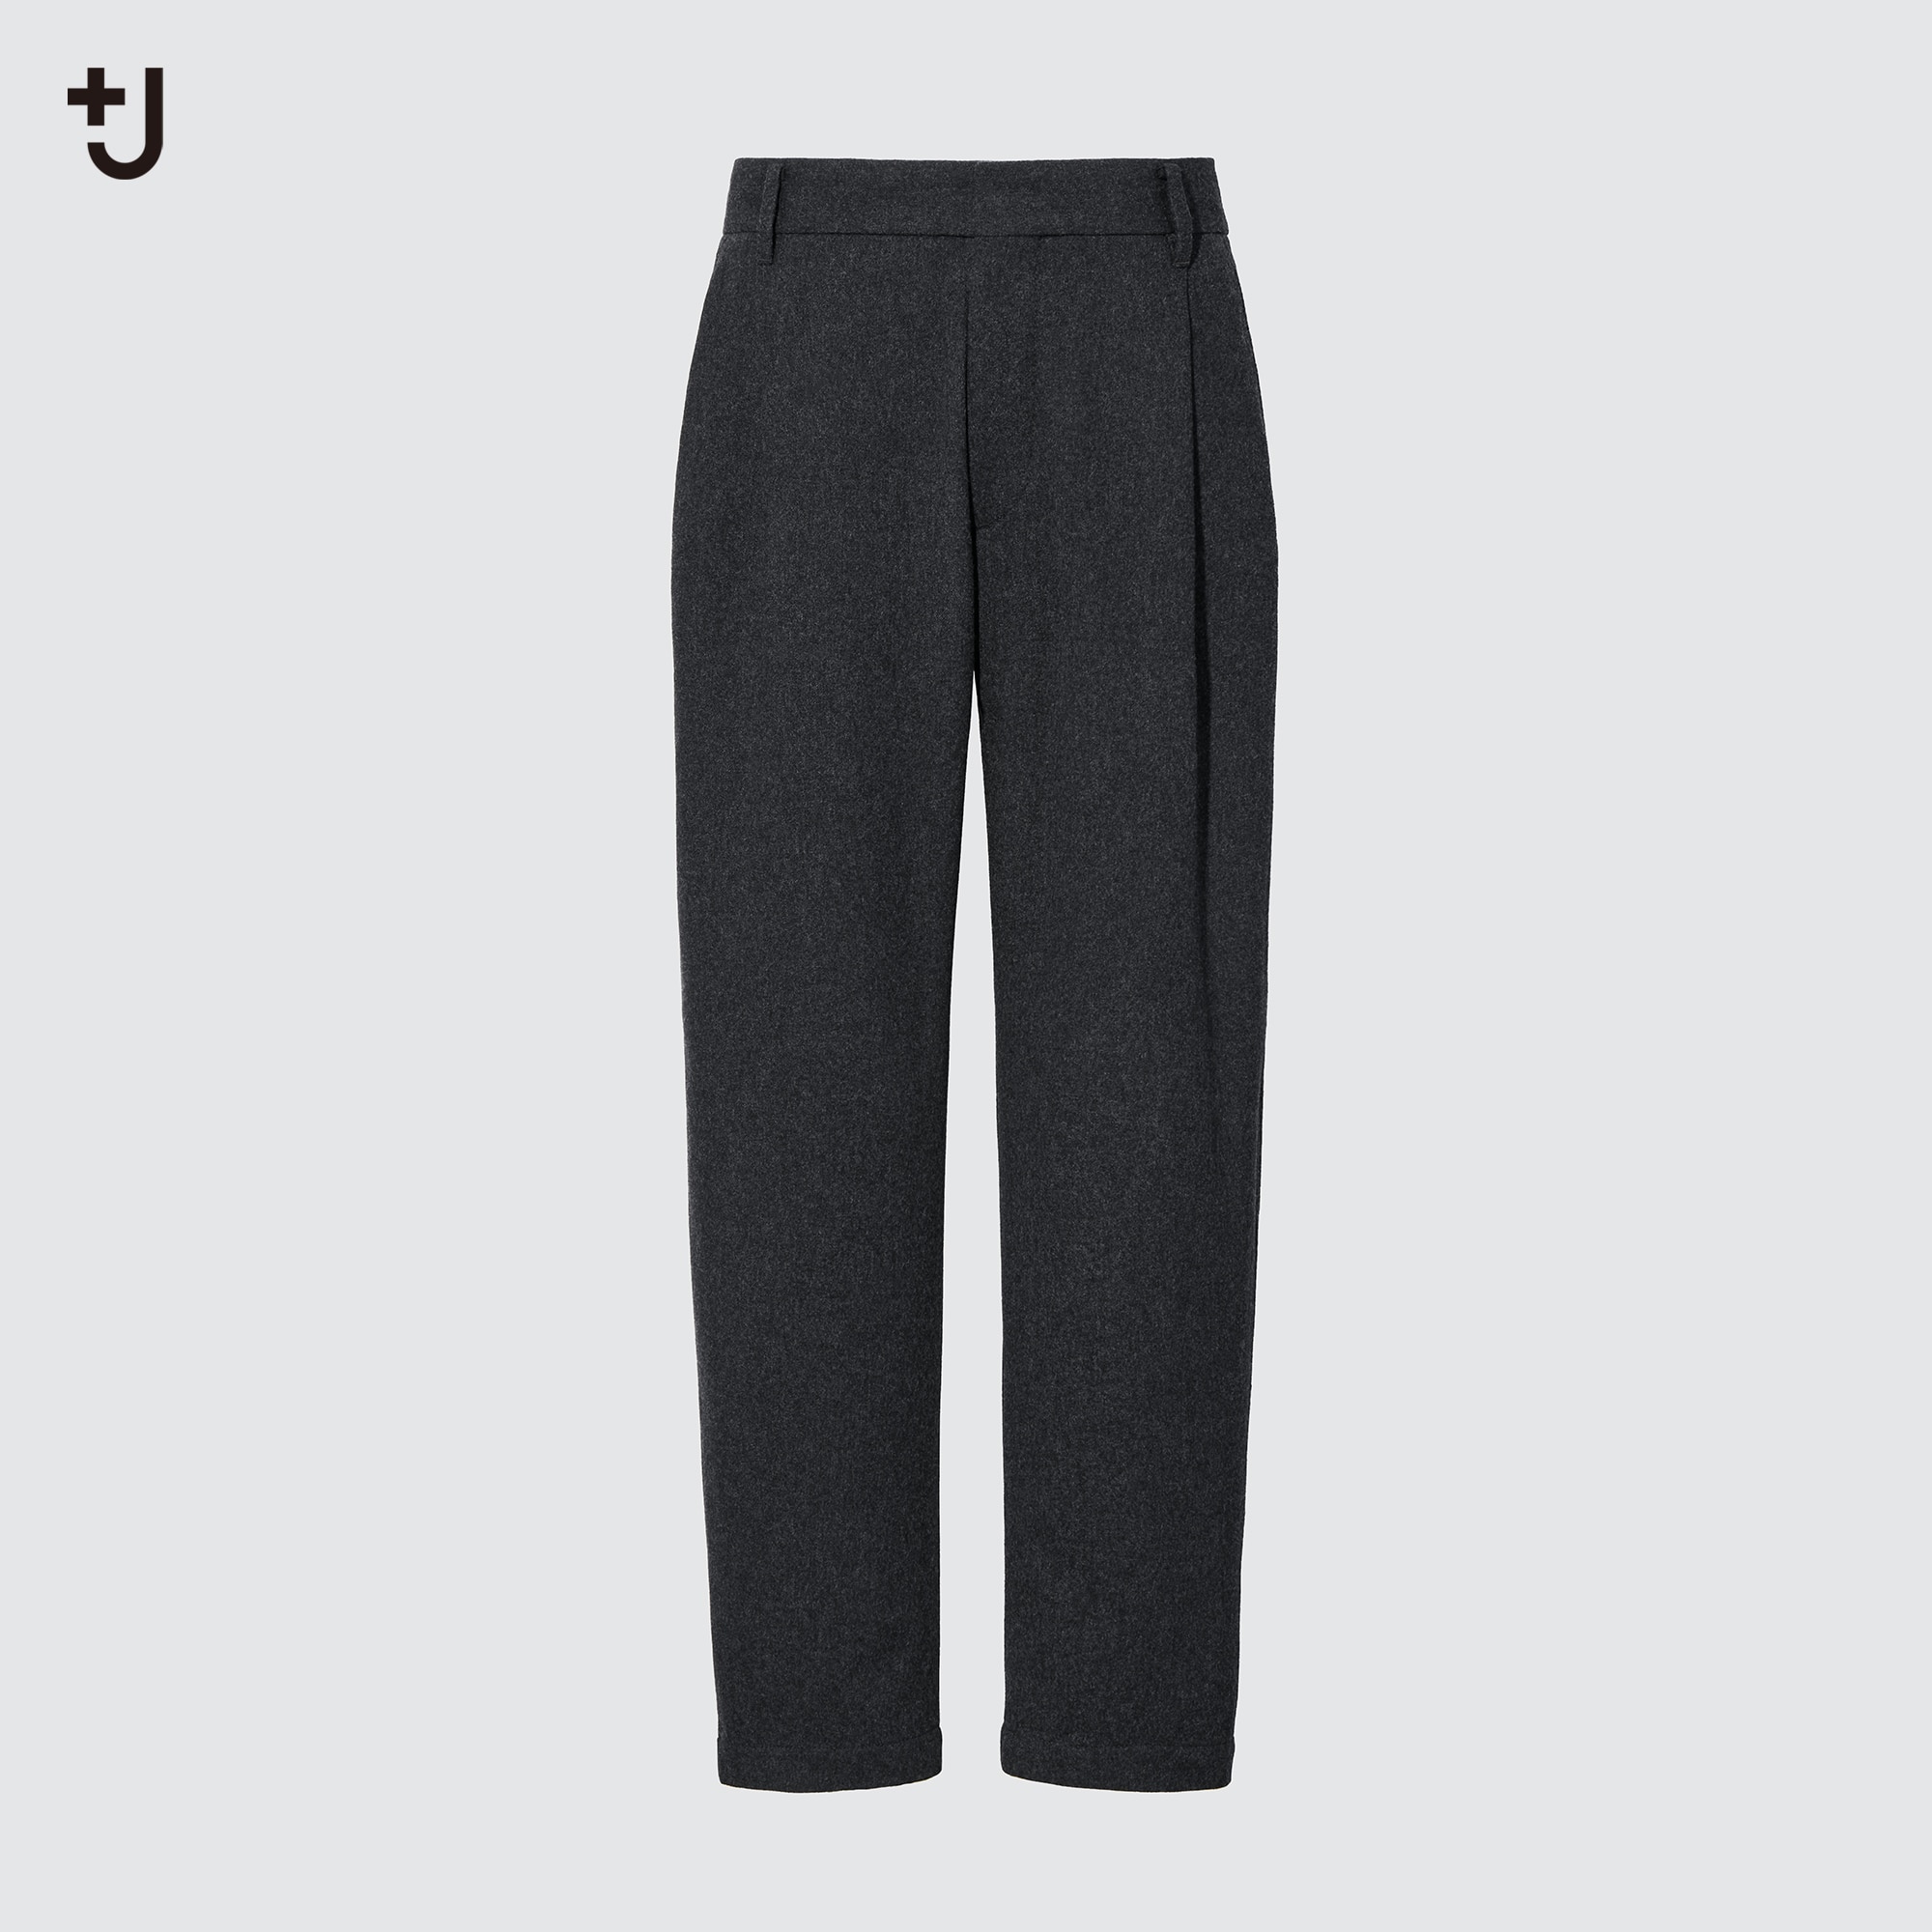 Acne Studios - Tailored wool blend trousers - Black